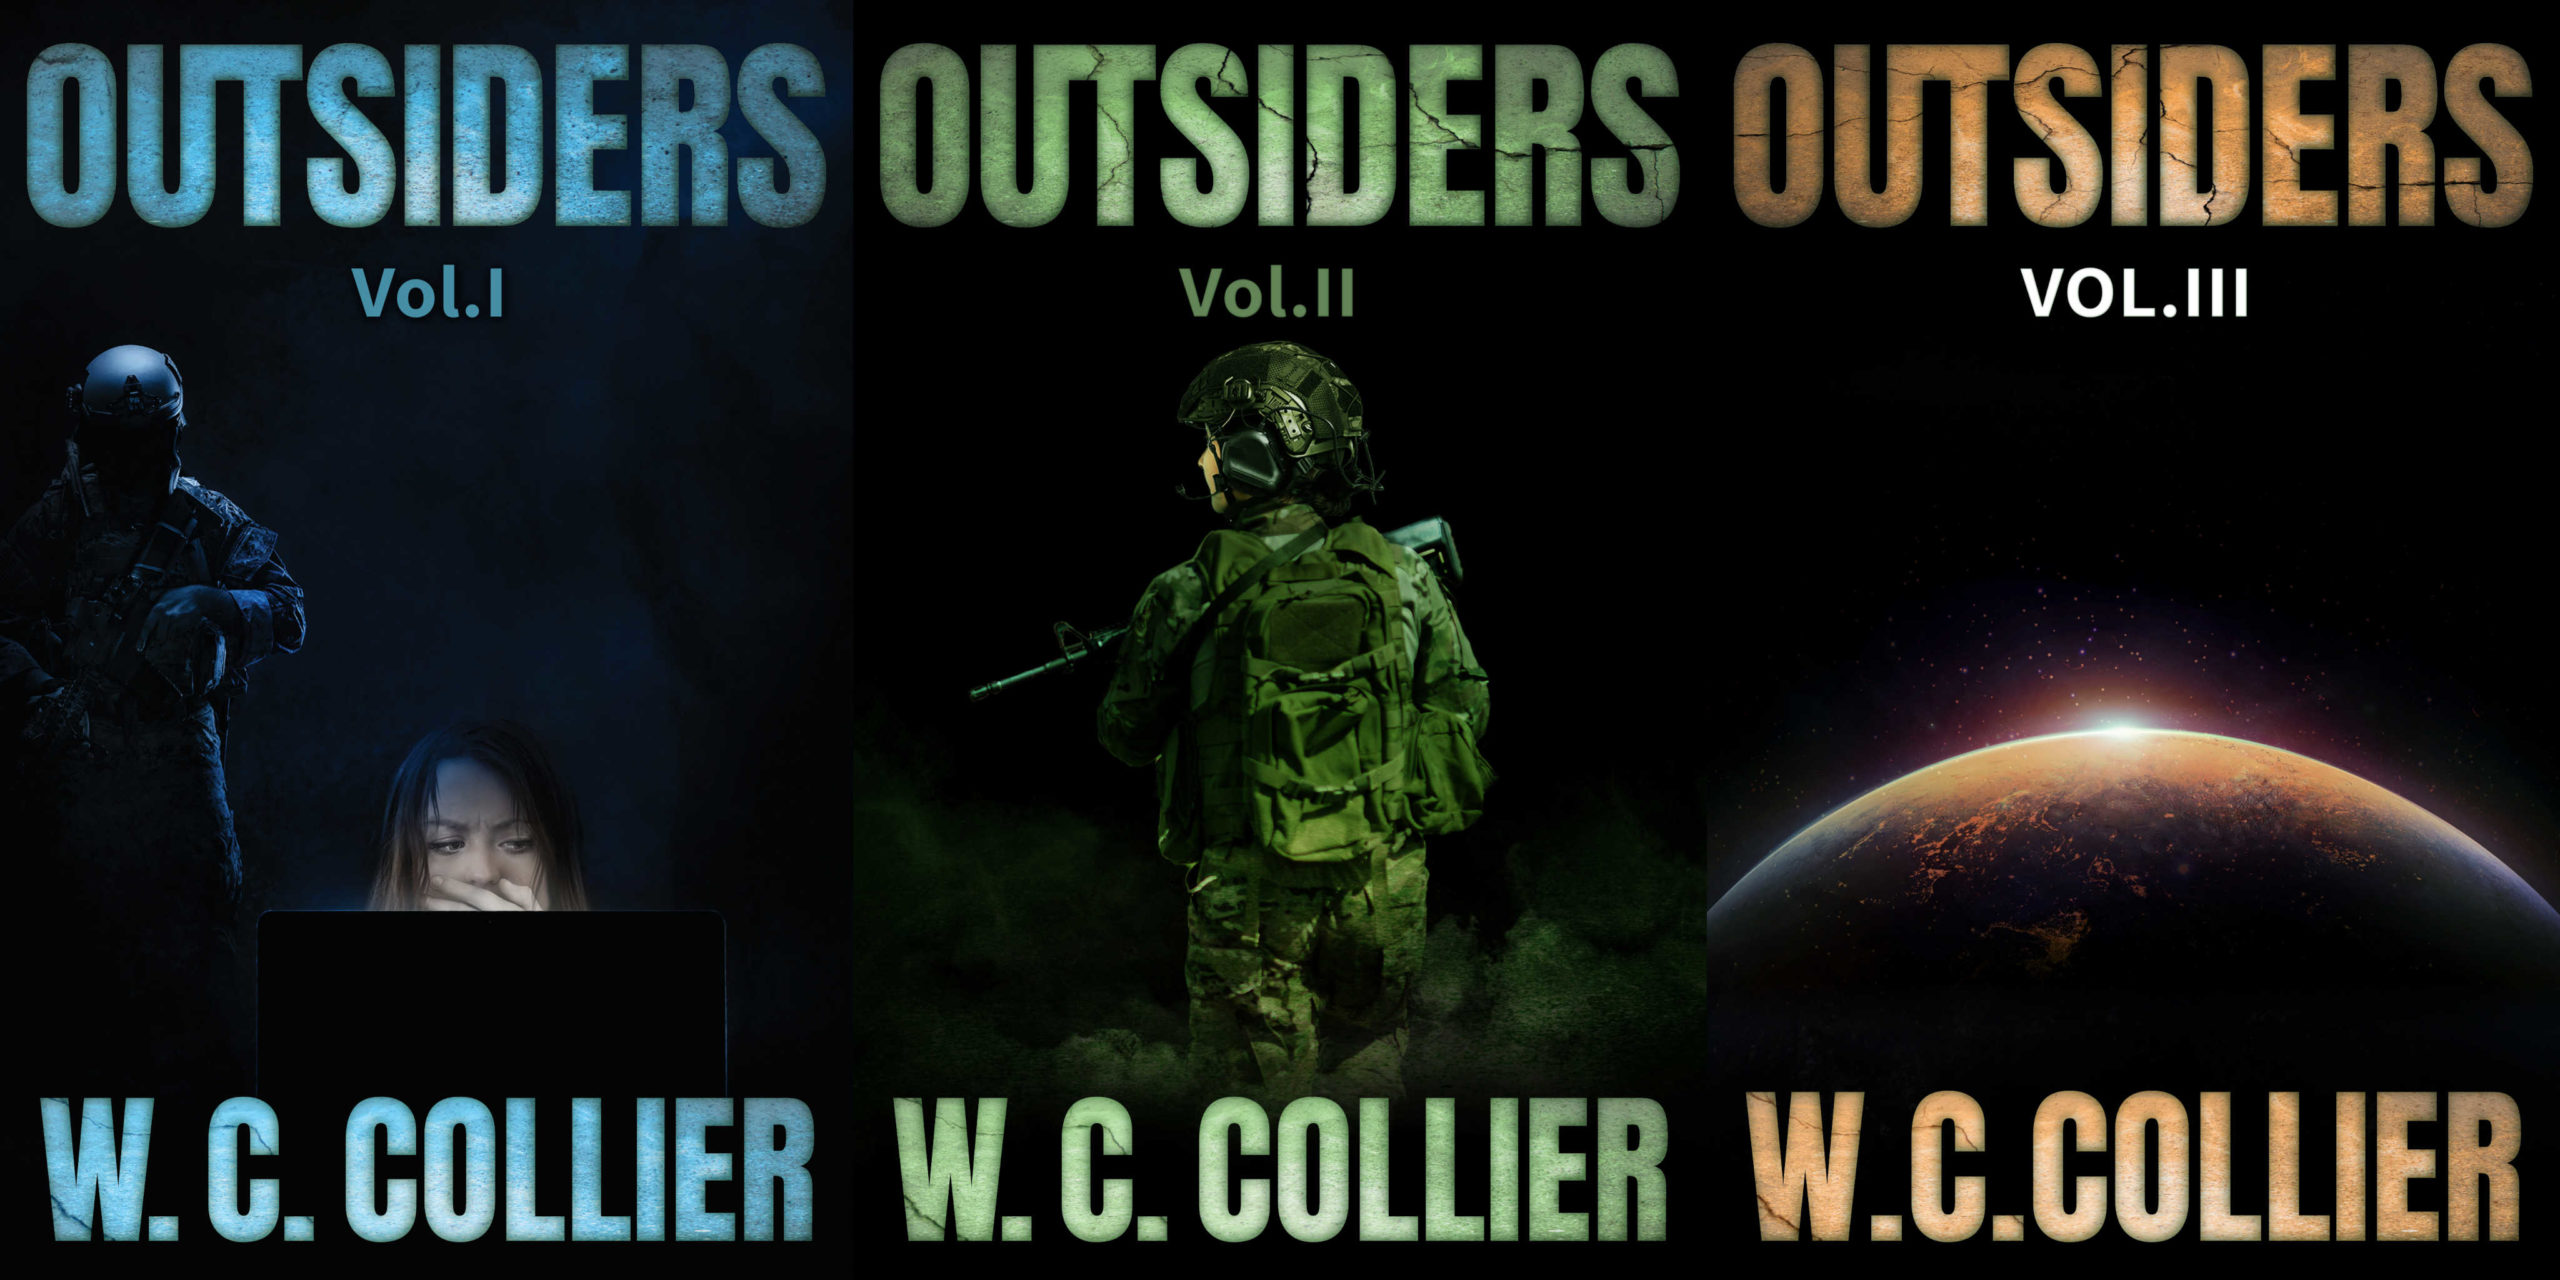 Outsiders Covers